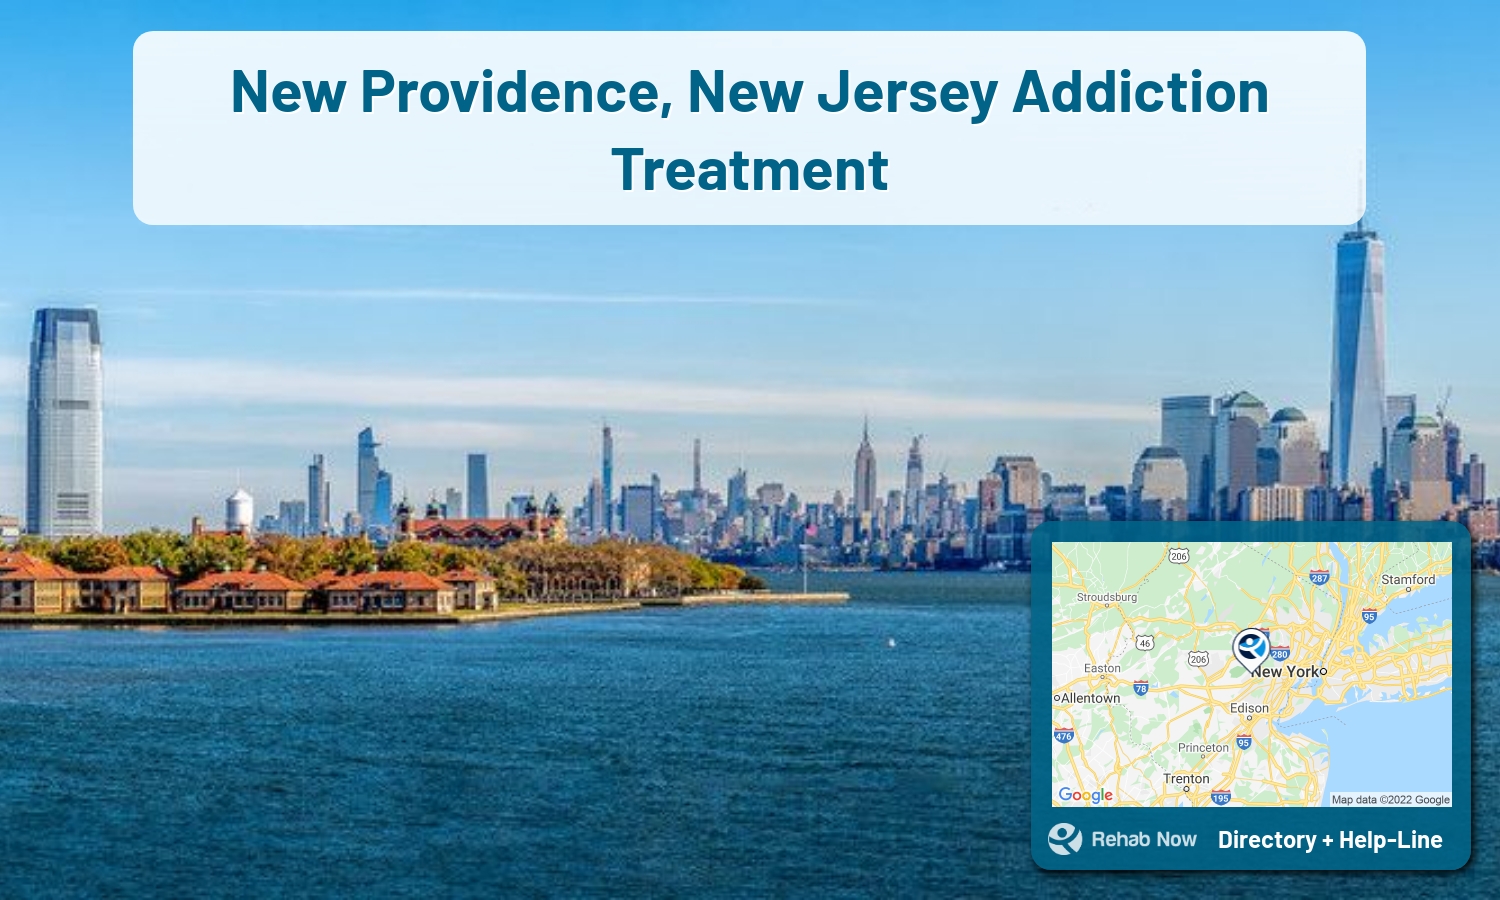 View options, availability, treatment methods, and more, for drug rehab and alcohol treatment in New Providence, New Jersey